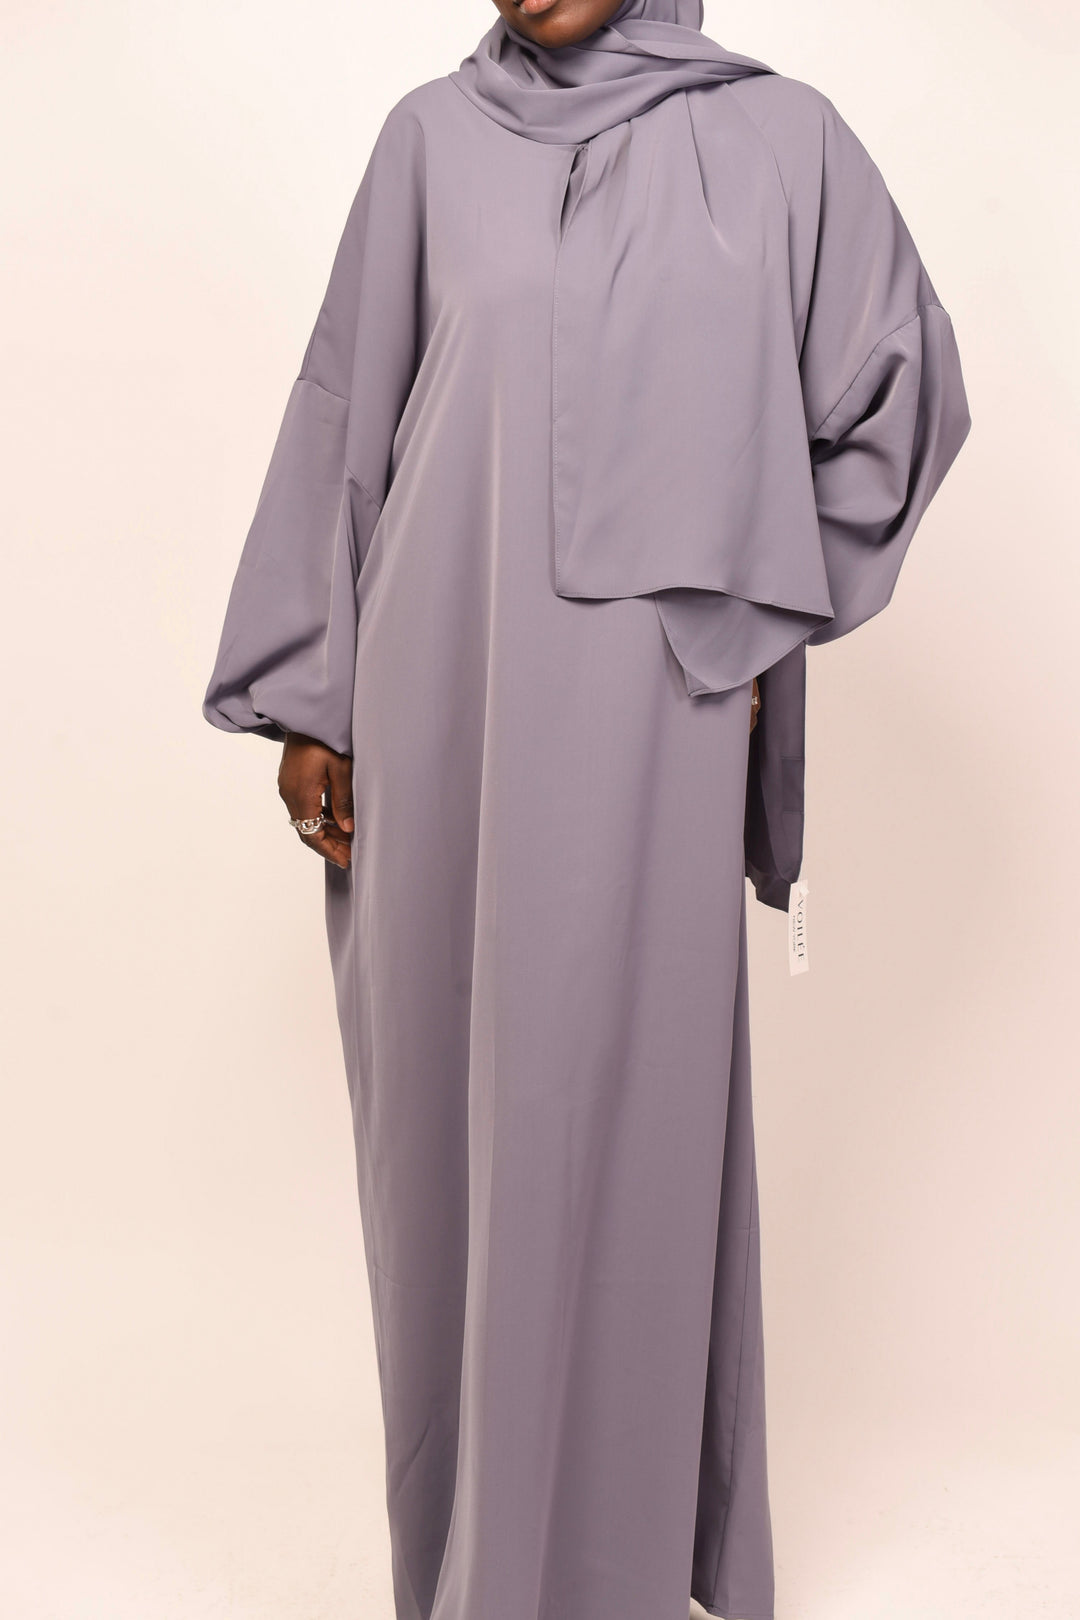 Get trendy with Salima Abaya With Hijab - Dark Gray -  available at Voilee NY. Grab yours for $42.90 today!